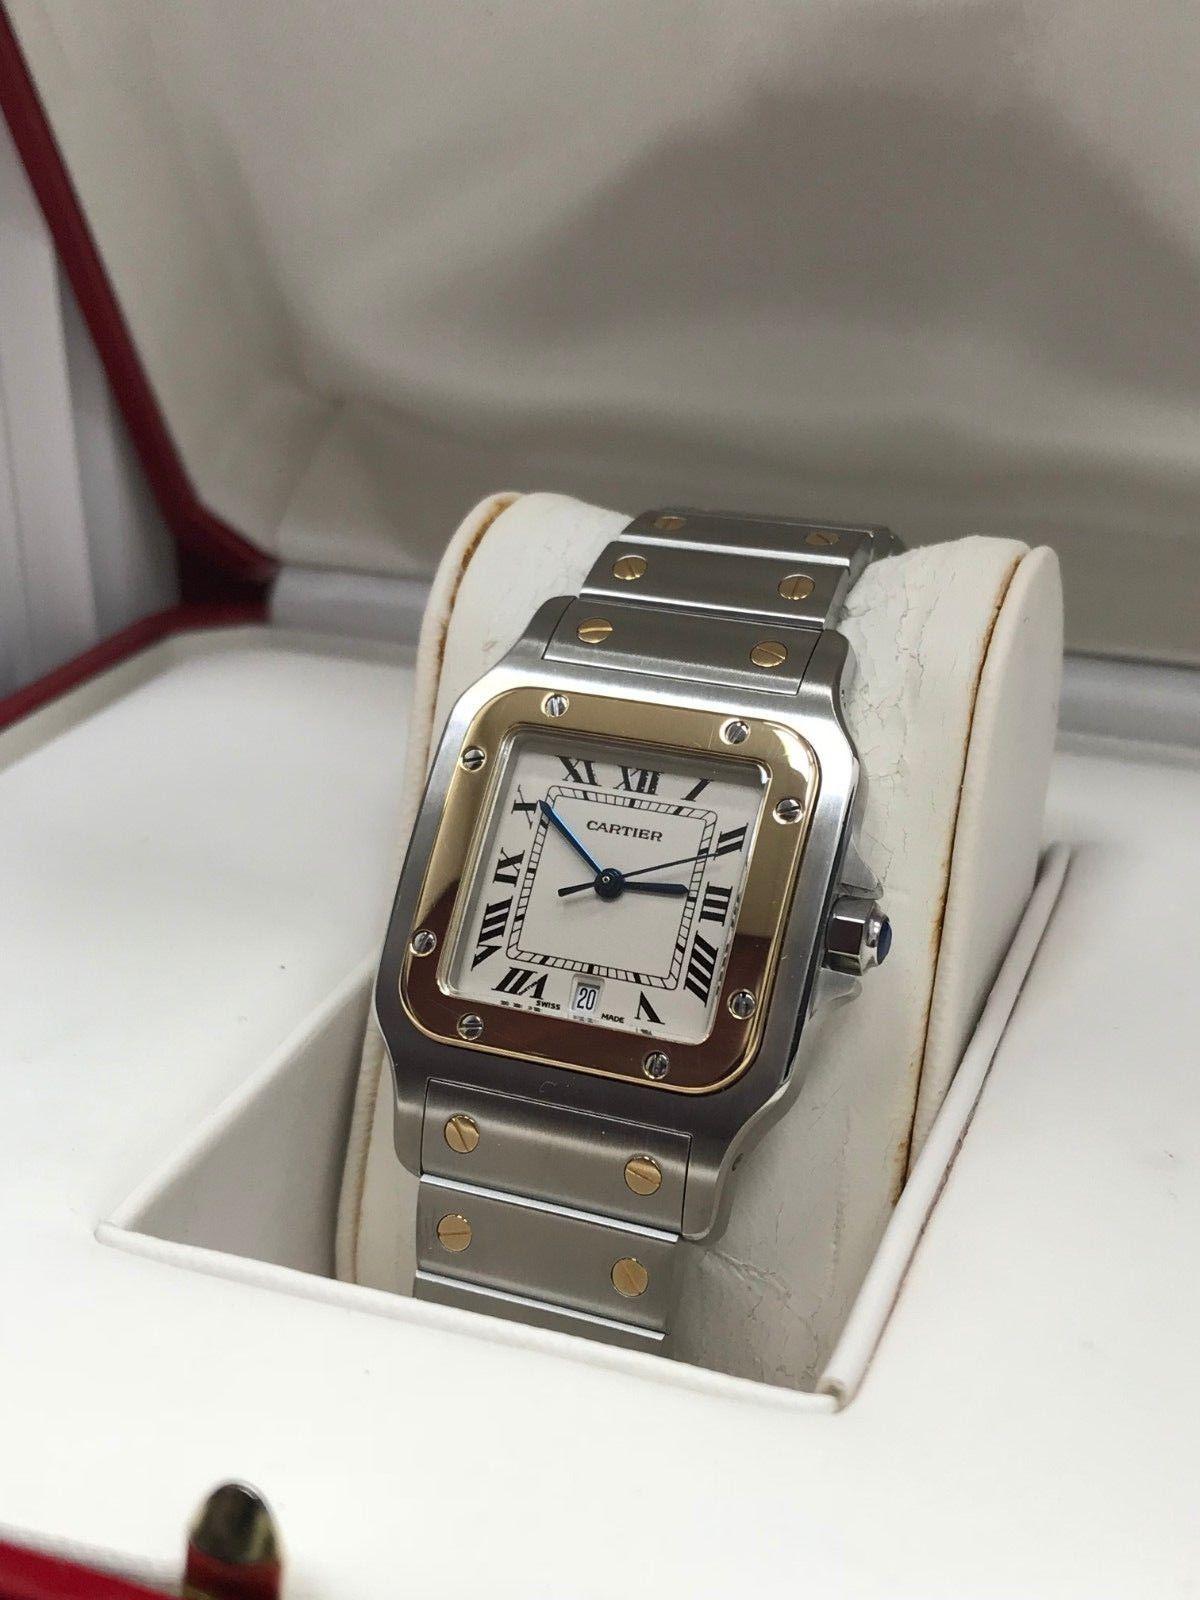 Style Number: 1566

Year: 2001

Model: Santos 

Case Material: Stainless Steel 

Band: Stainless Steel 

Bezel: 18K Yellow Gold

Dial: Ivory / White

Face: Sapphire Crystal 

Case Size: 29mm

Includes: 

-Cartier Box & Papers

-Certified Appraisal